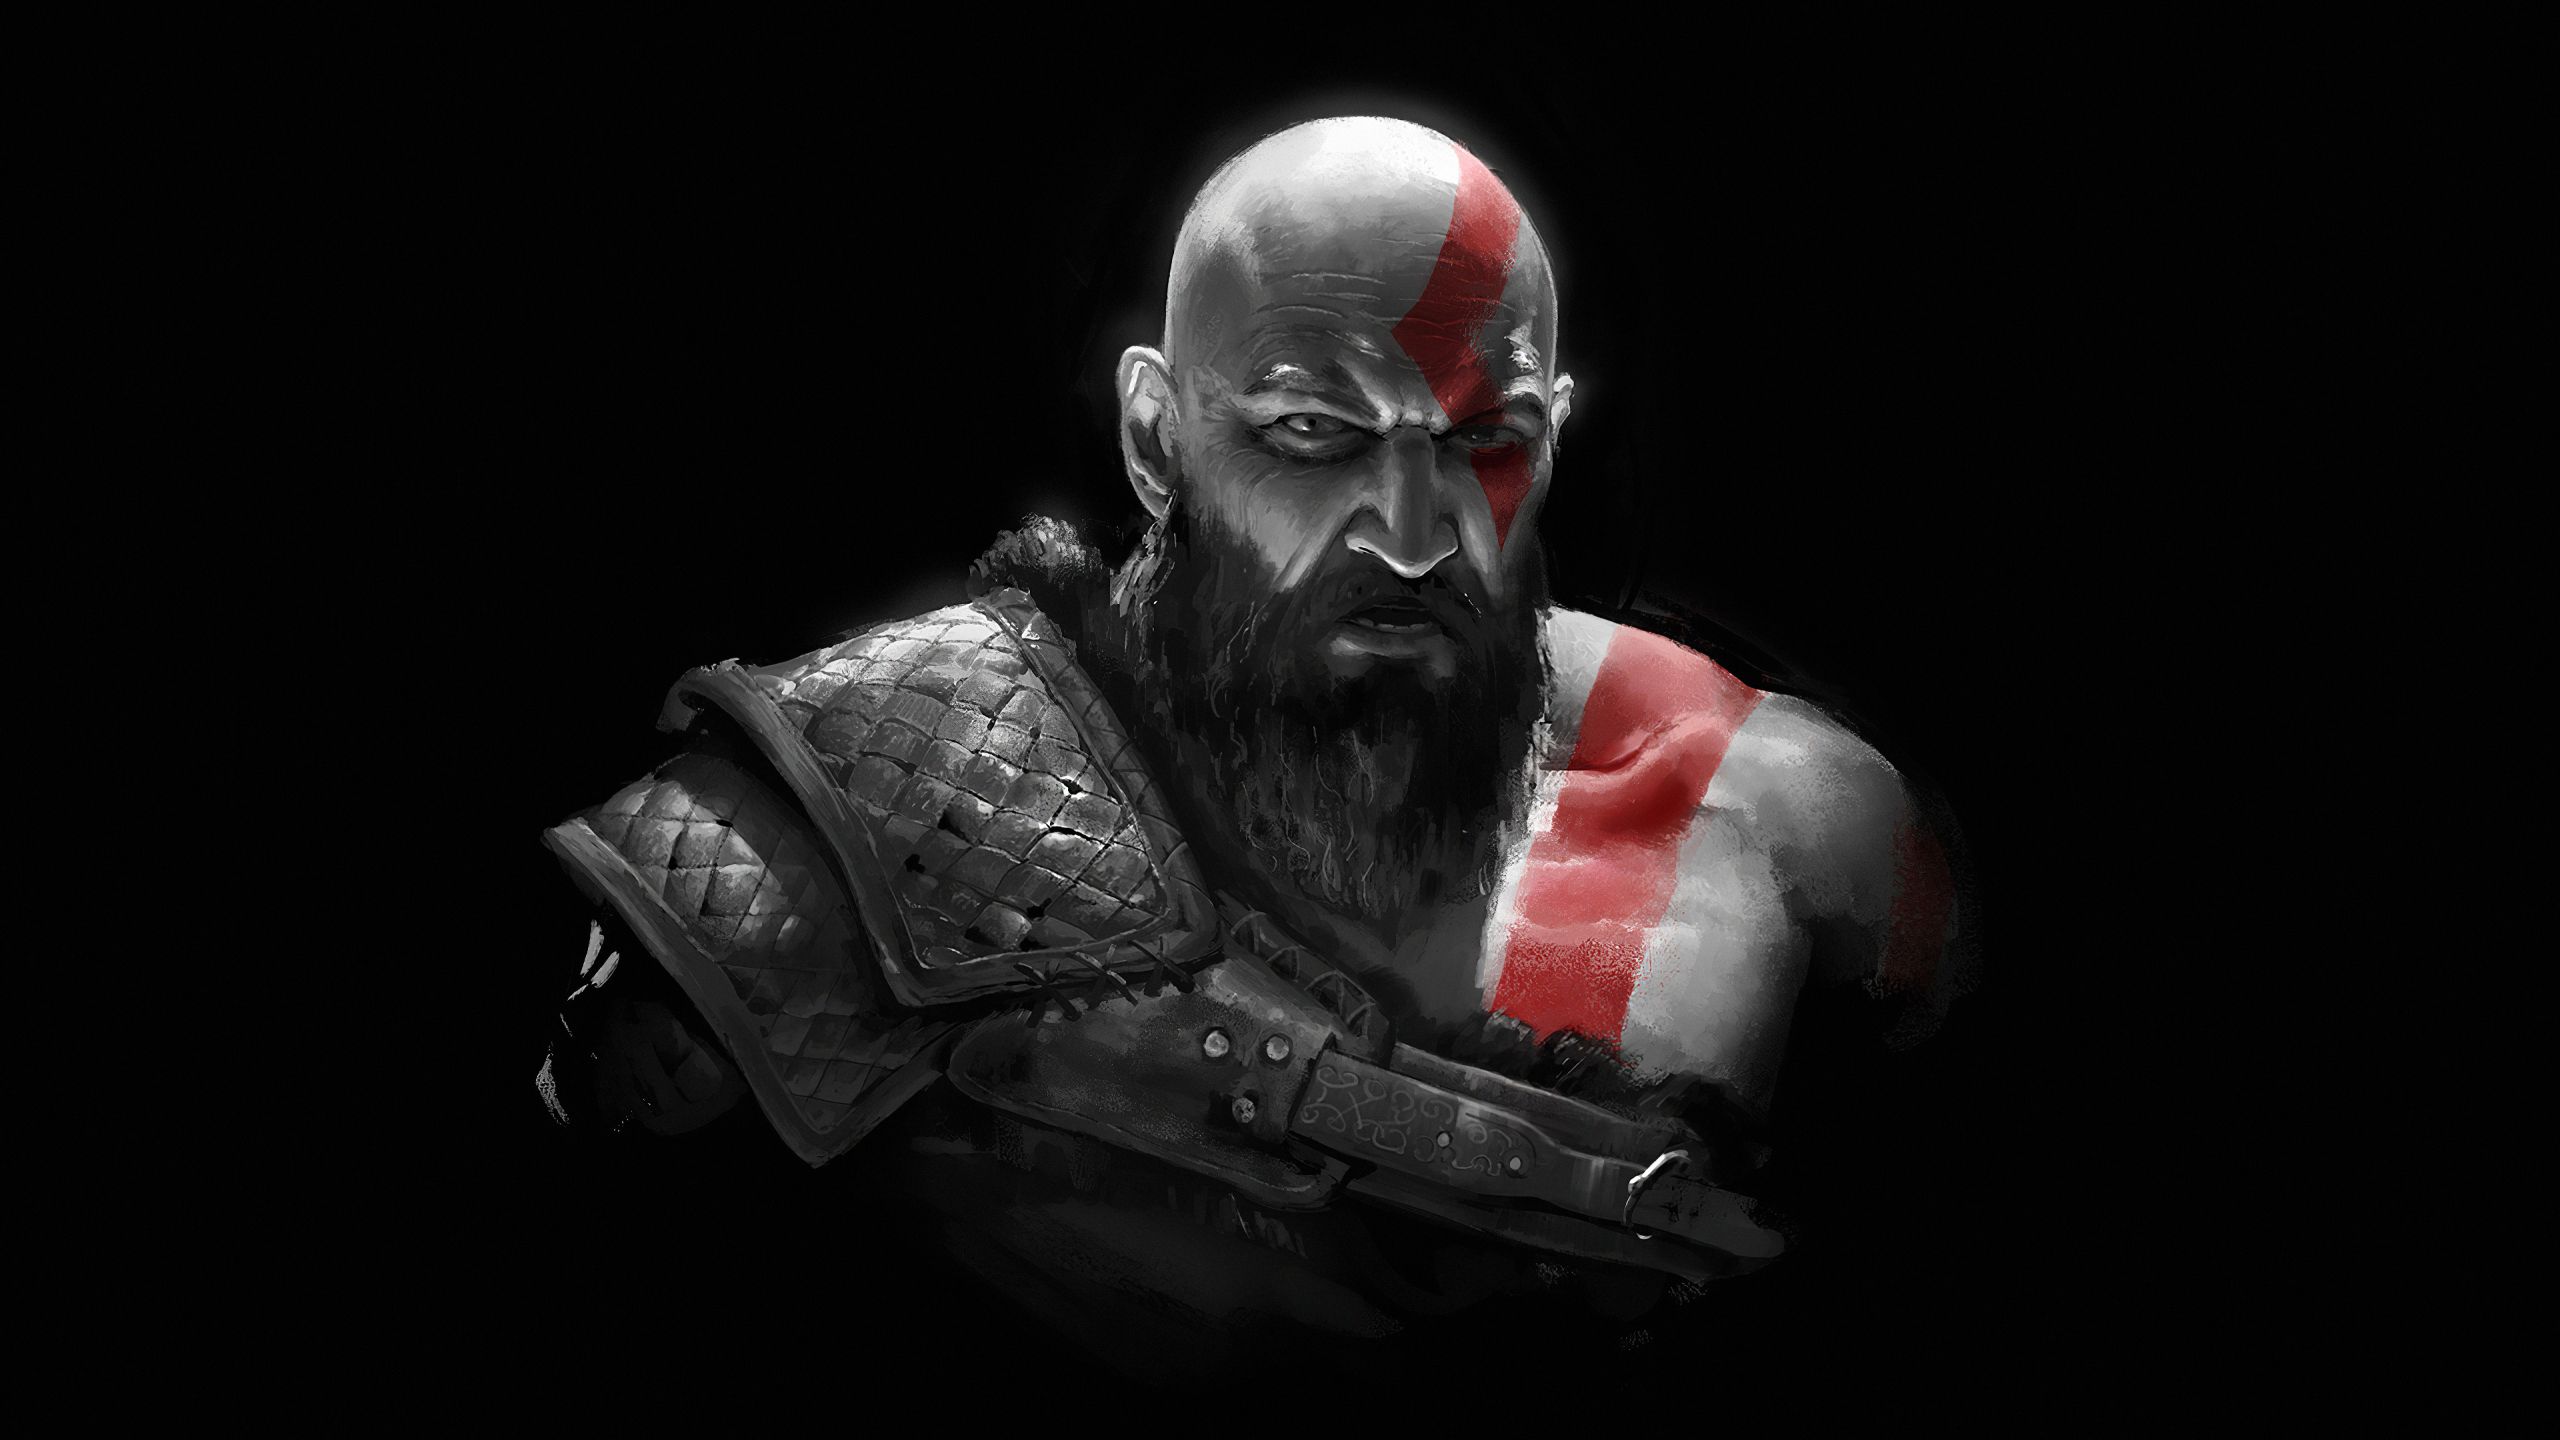 Kratos GoW Amoled 1440P Resolution Wallpaper, HD Games 4K Wallpaper, Image, Photo and Background